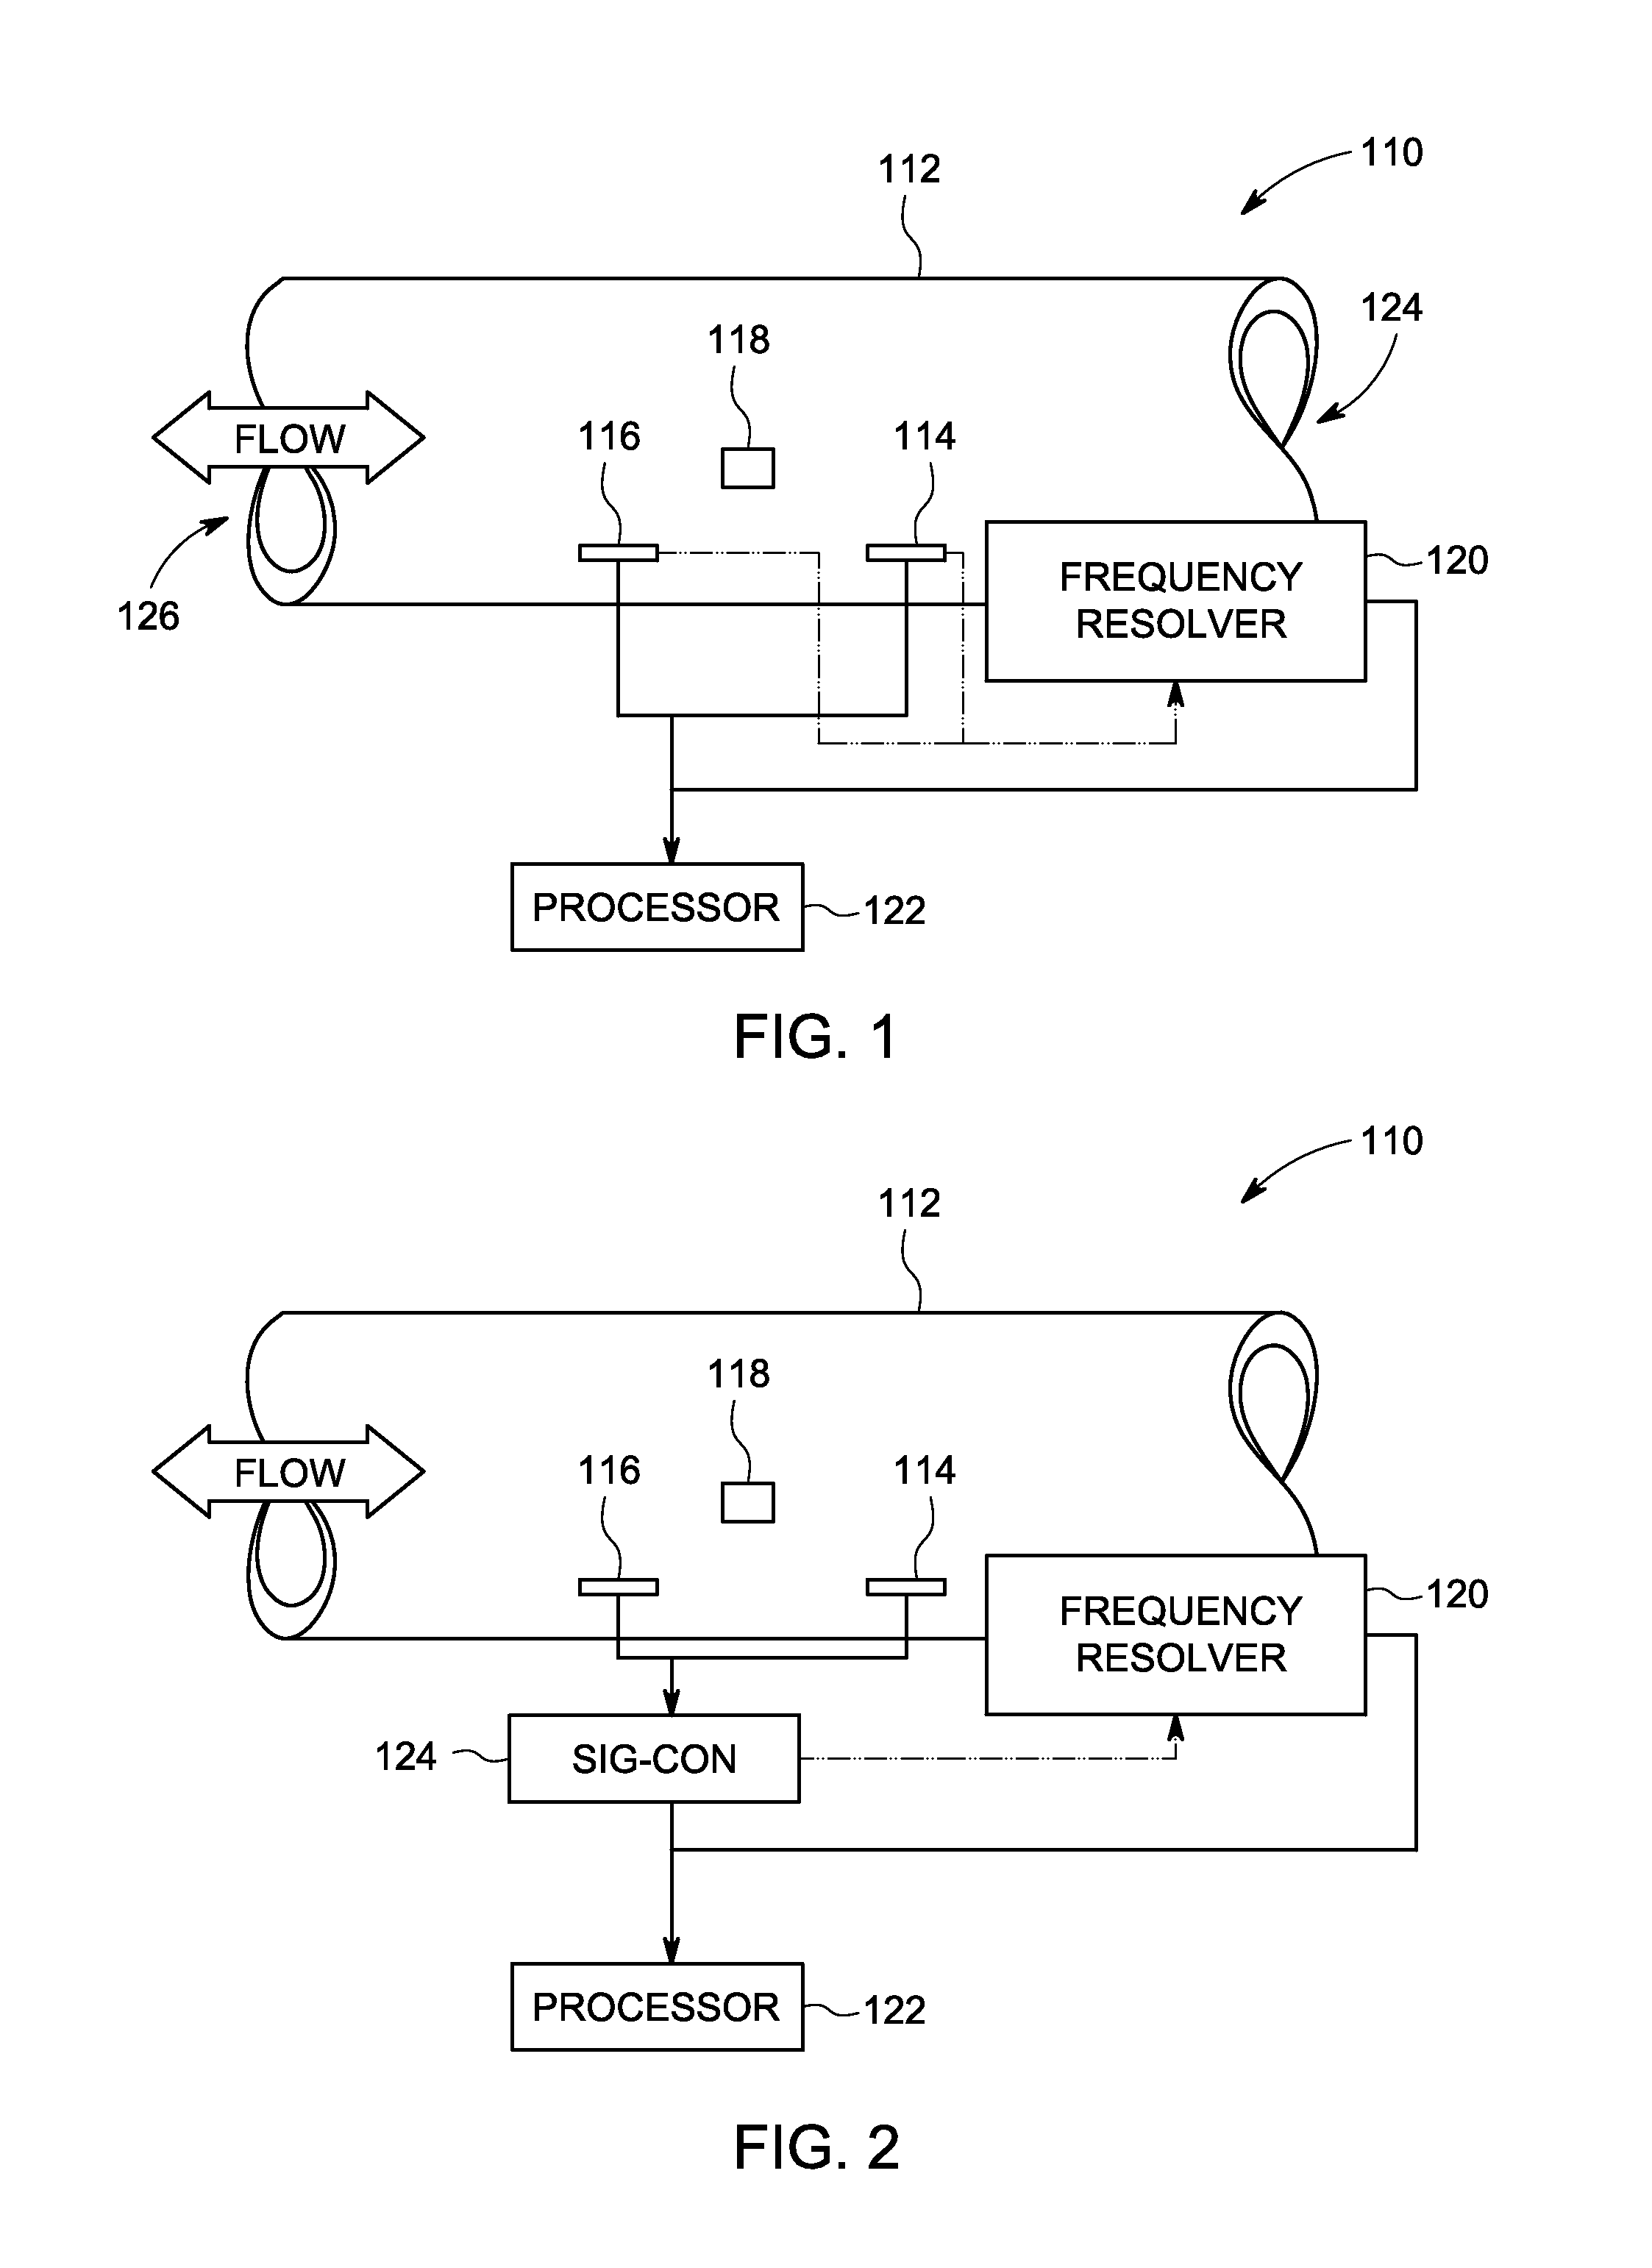 Systems and methods for flow sensing in a conduit